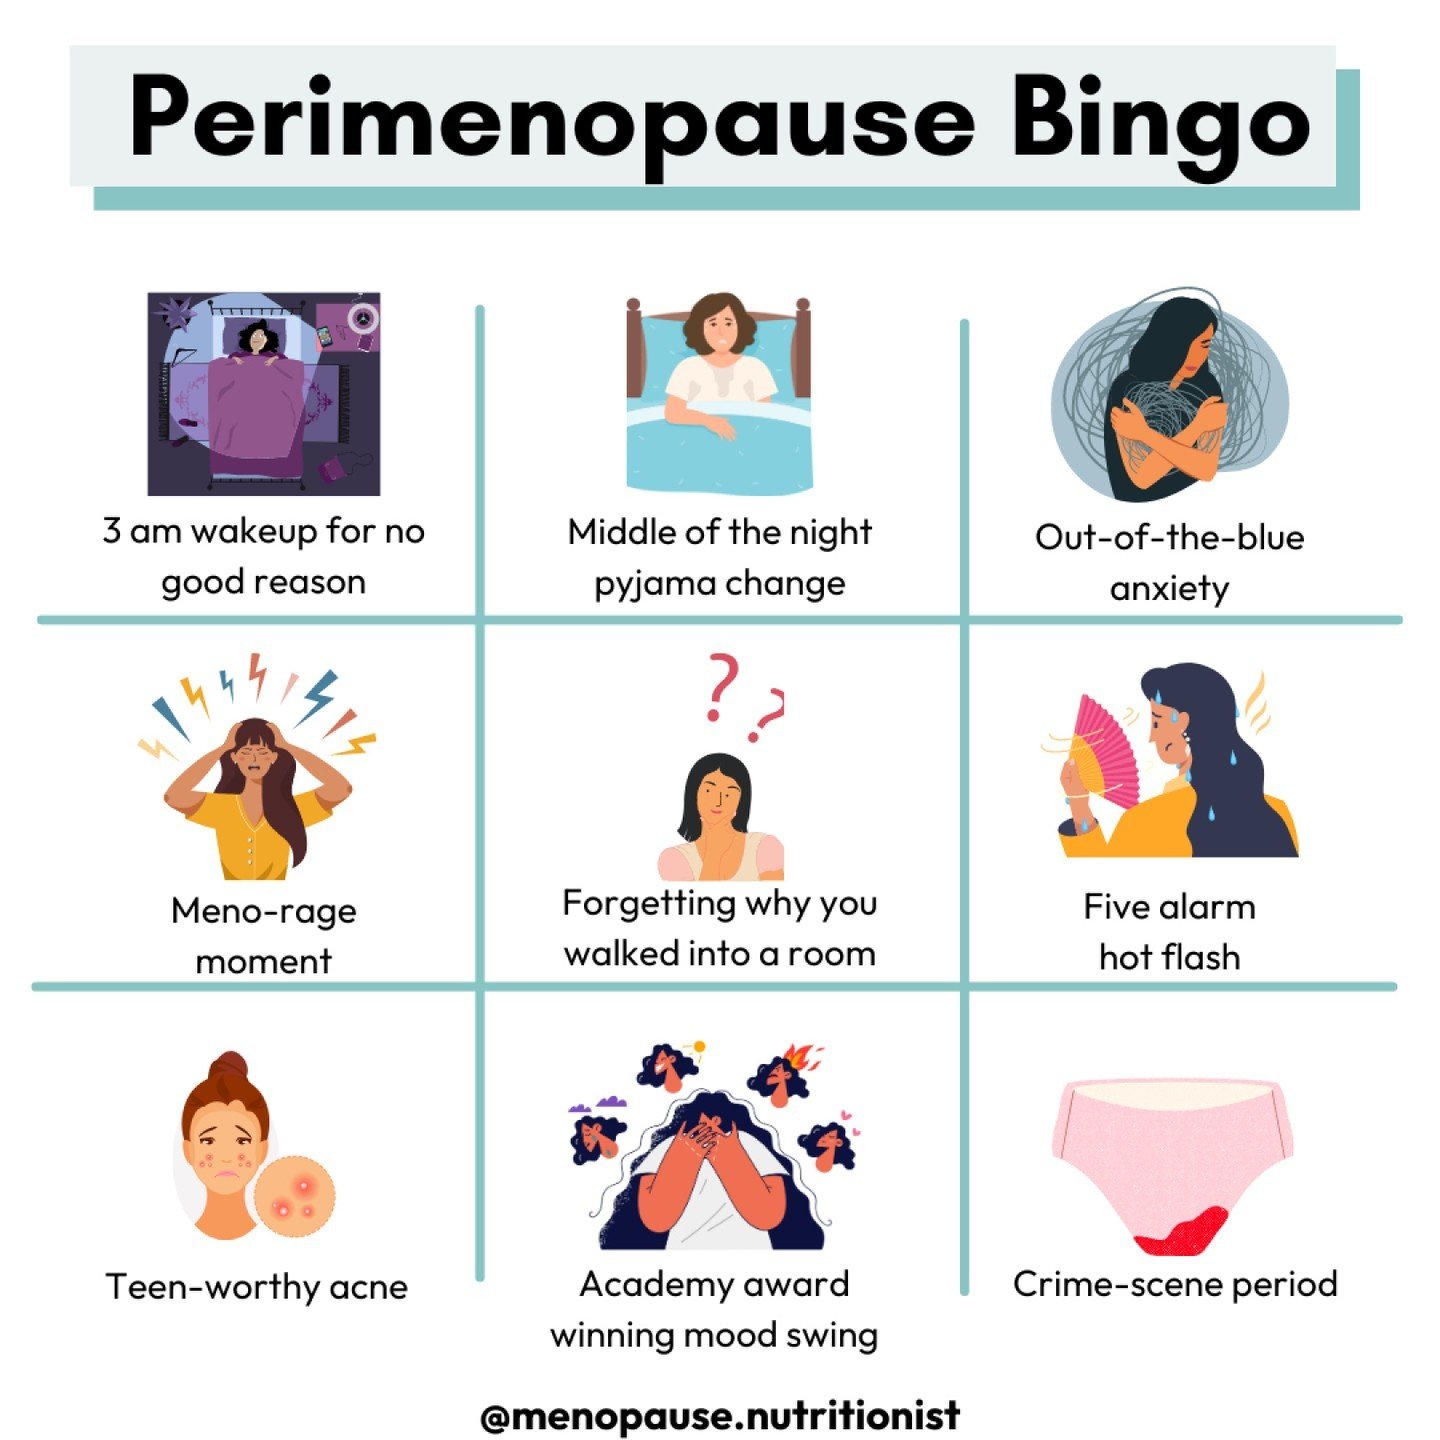 What's on your bingo card today? 

Disclaimer - not a complete list. Just like a real bingo card, not everyone gets the same numbers at the same time.😂

But, let's talk about some of the most common signs and symptoms of early perimenopause.

What a